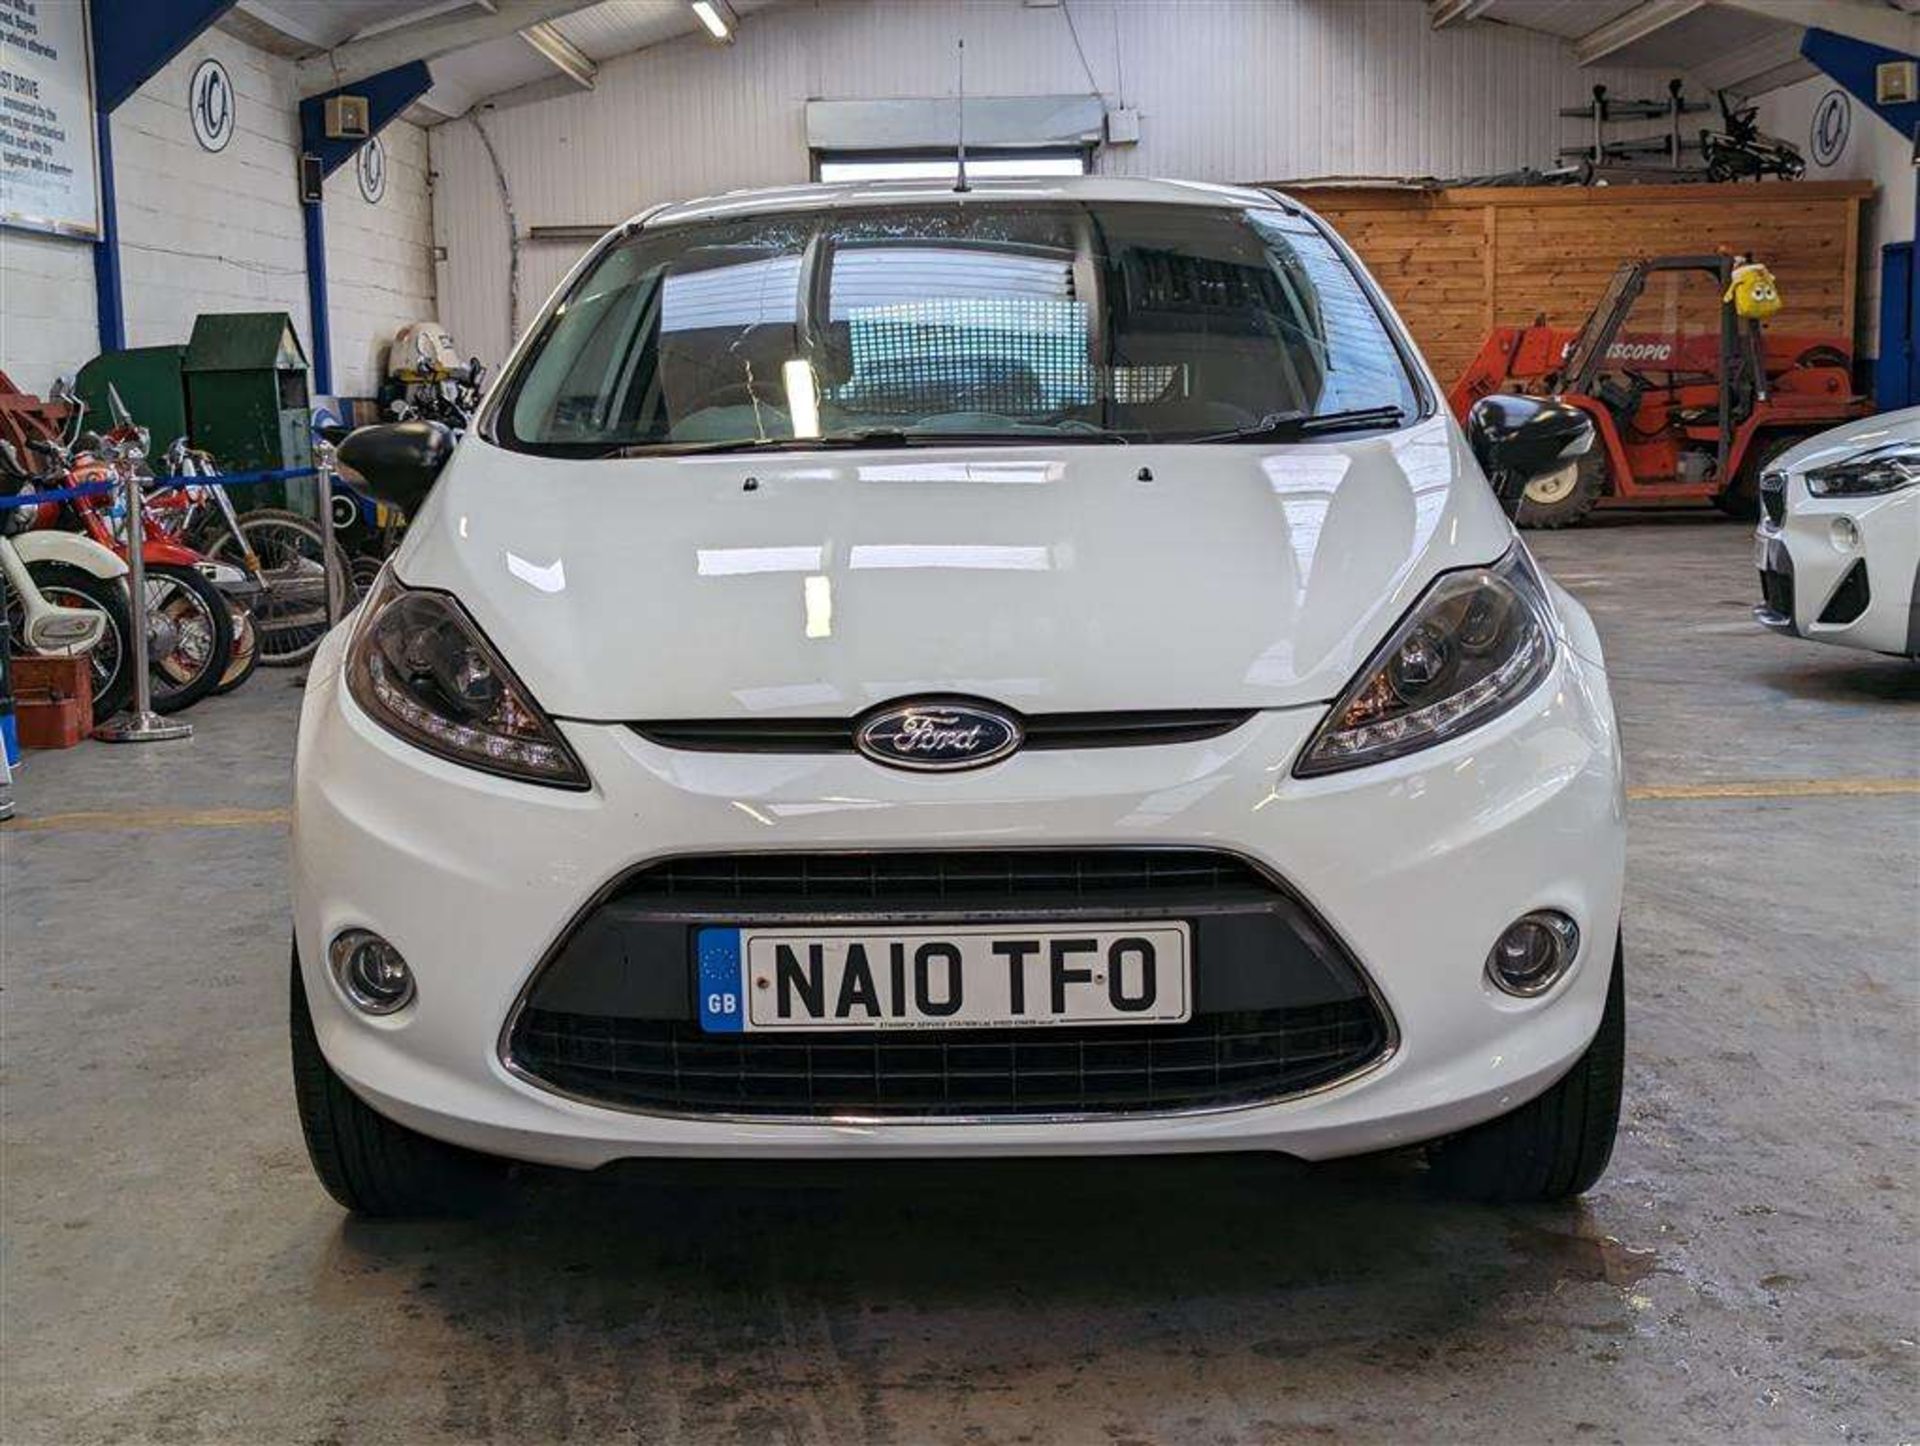 2010 FORD FIESTA BASE TDCI 68 - Image 20 of 20